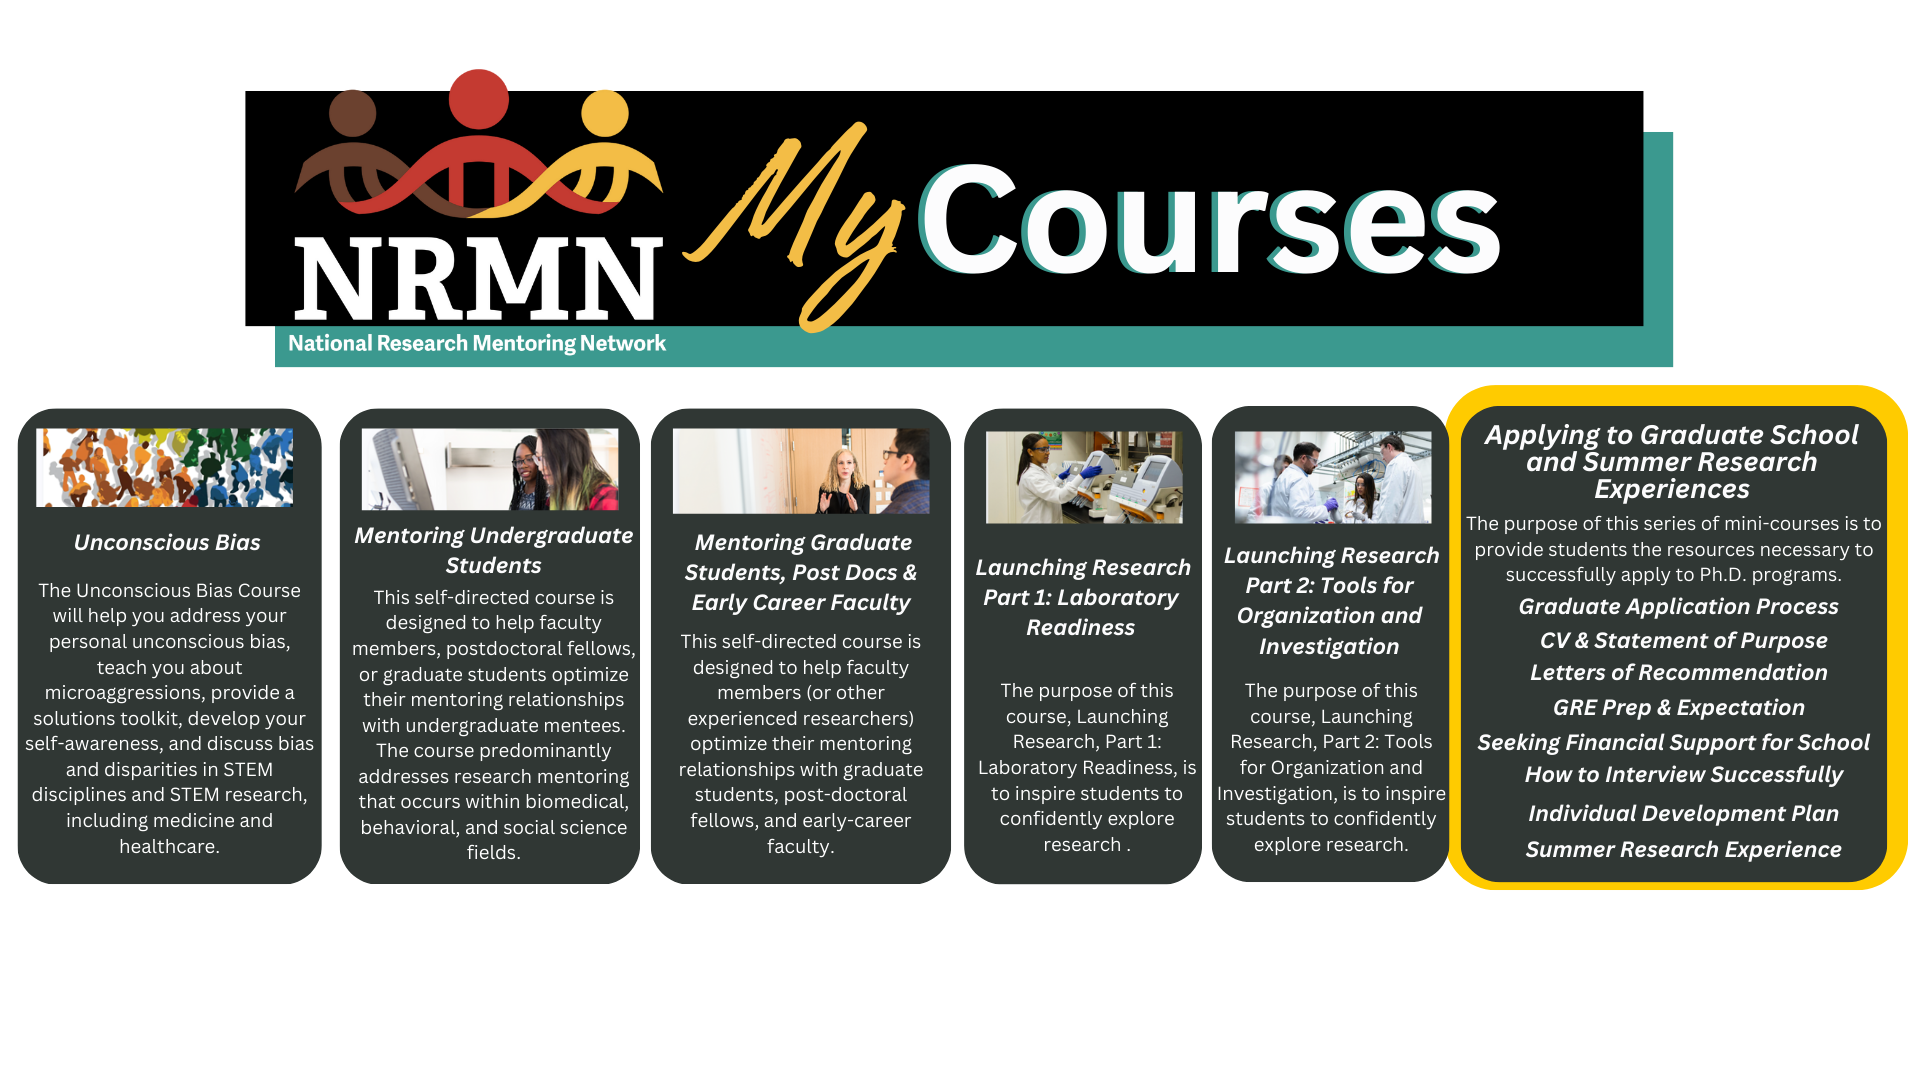 MyCourses, detail overview of program offerings for asynchronous virtual trainings.